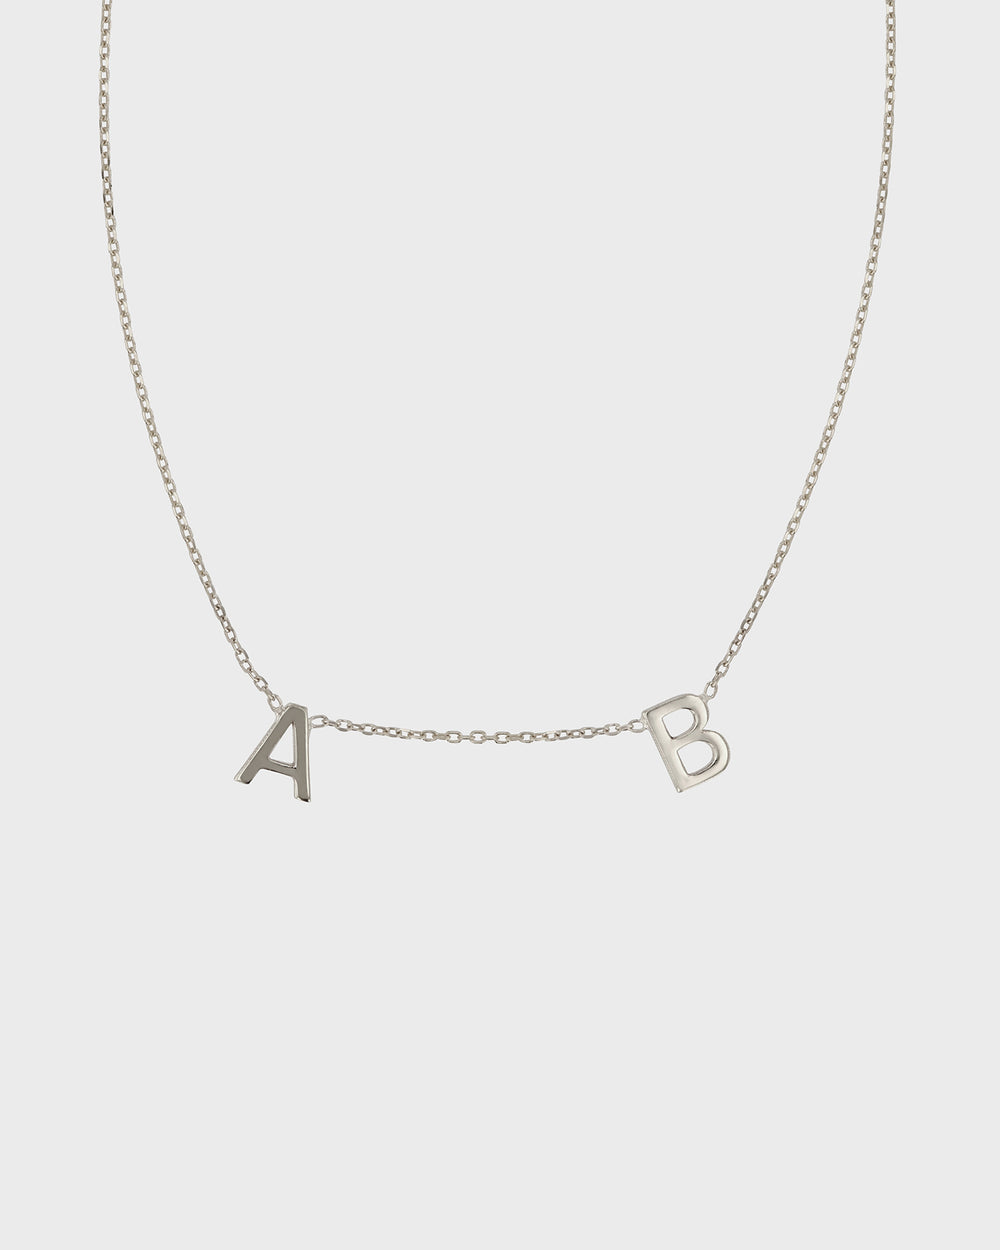 K' Initial necklace with 0.10 Carat TW of Diamonds in 10ct White Gold